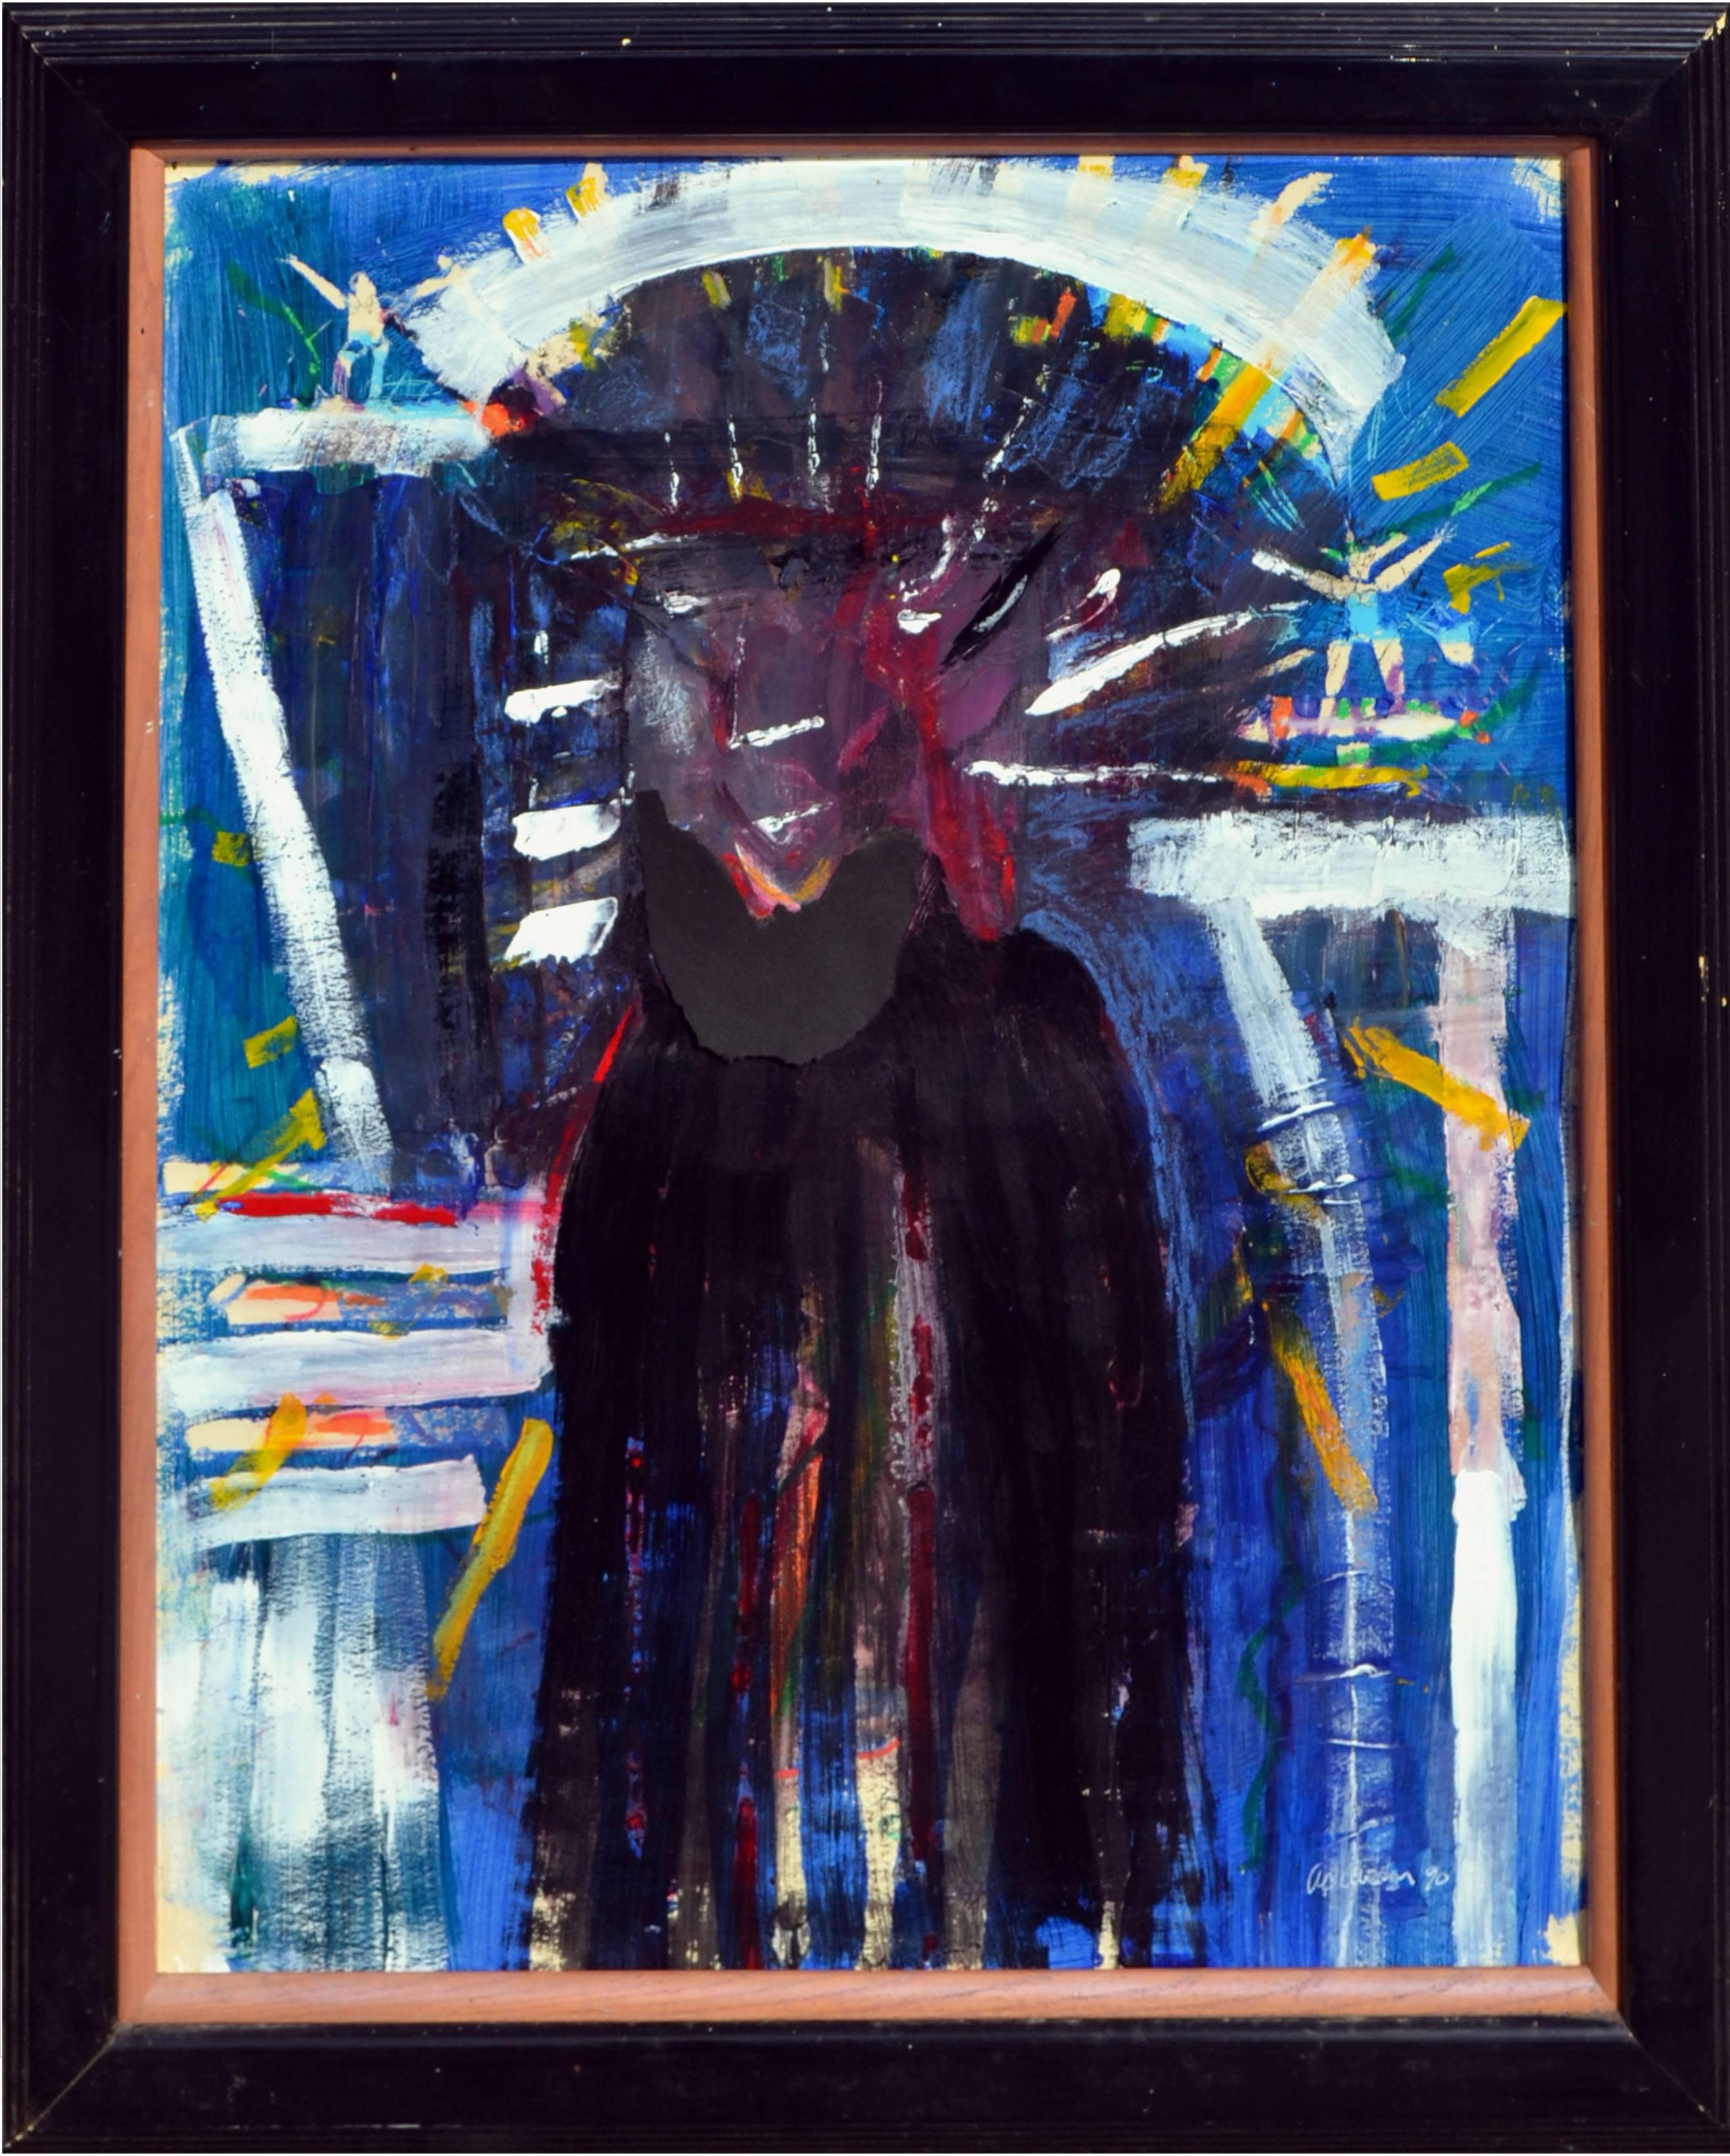 "Spirit of the Buffalo" - Las Vegas Abstract Expressionist Figurative 